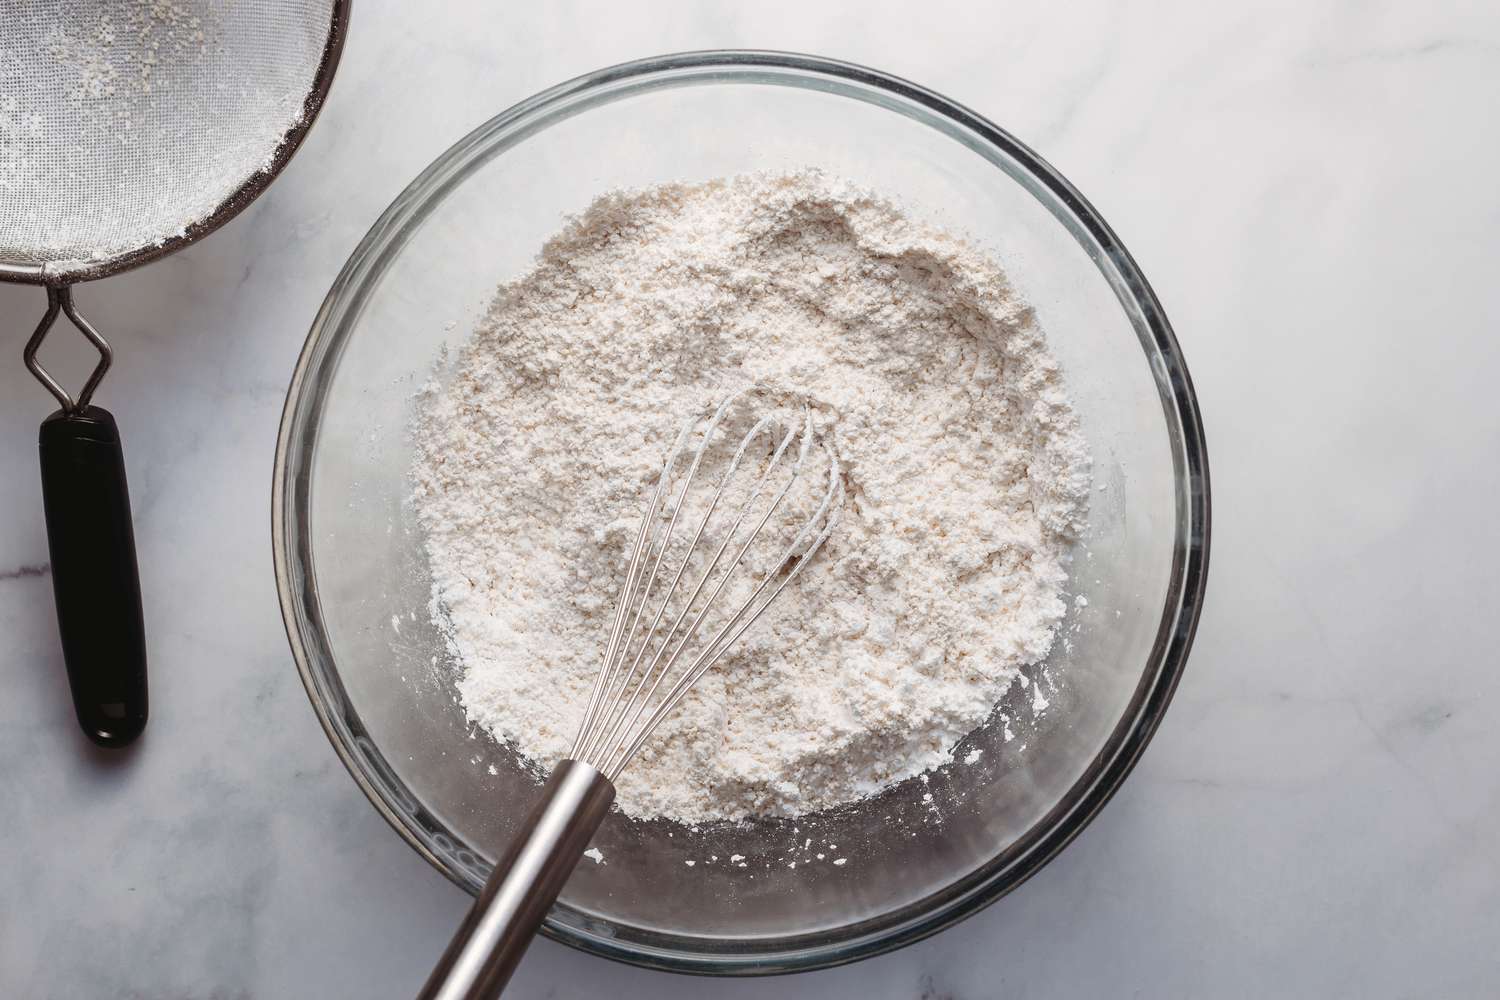 Almond flour, confectioners' sugar, and salt being stirred together in a bowl